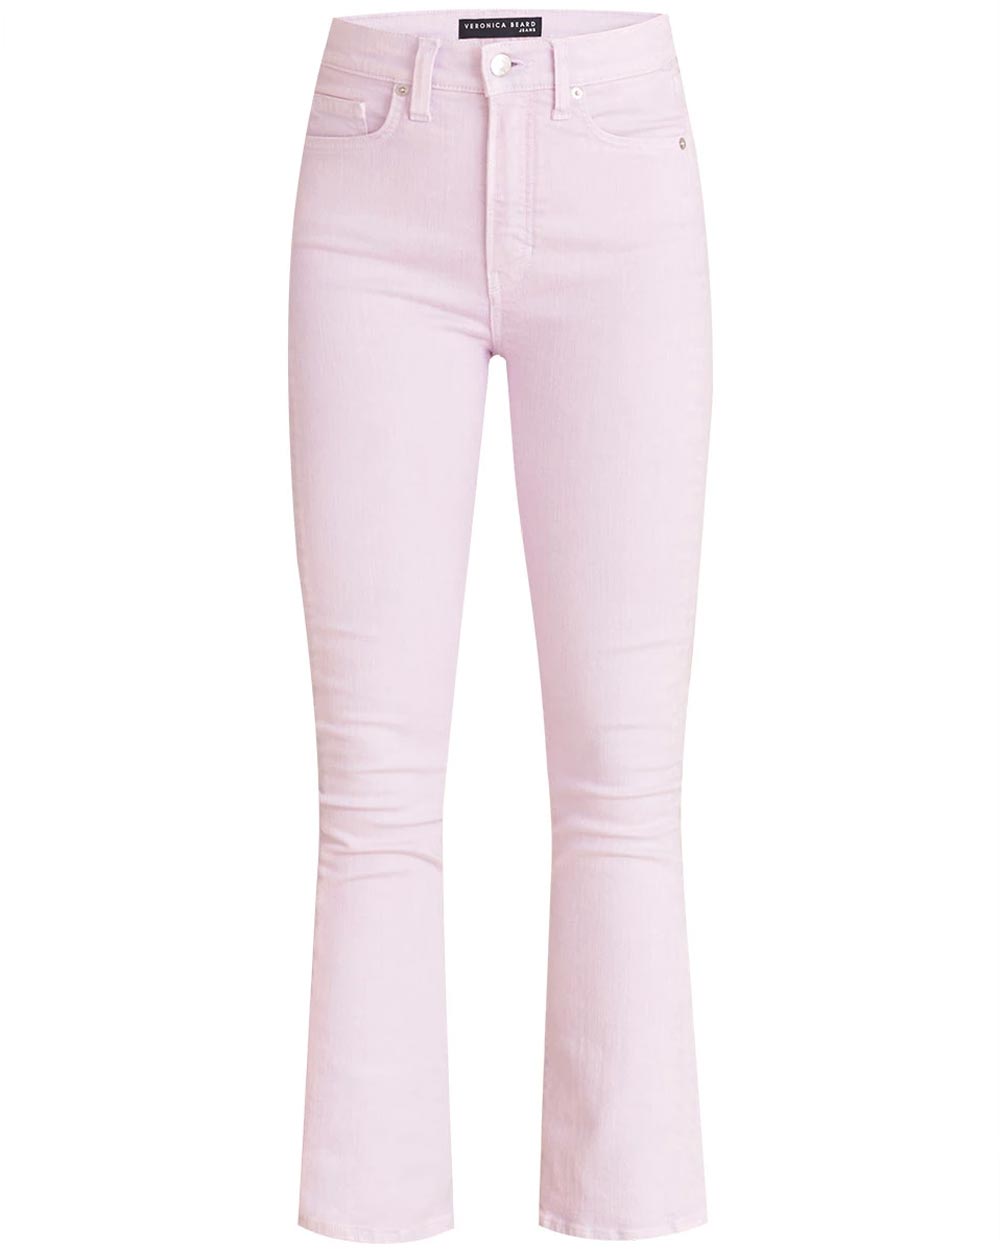 Carly High Rise Flare Jean in Lavender Tie Dye